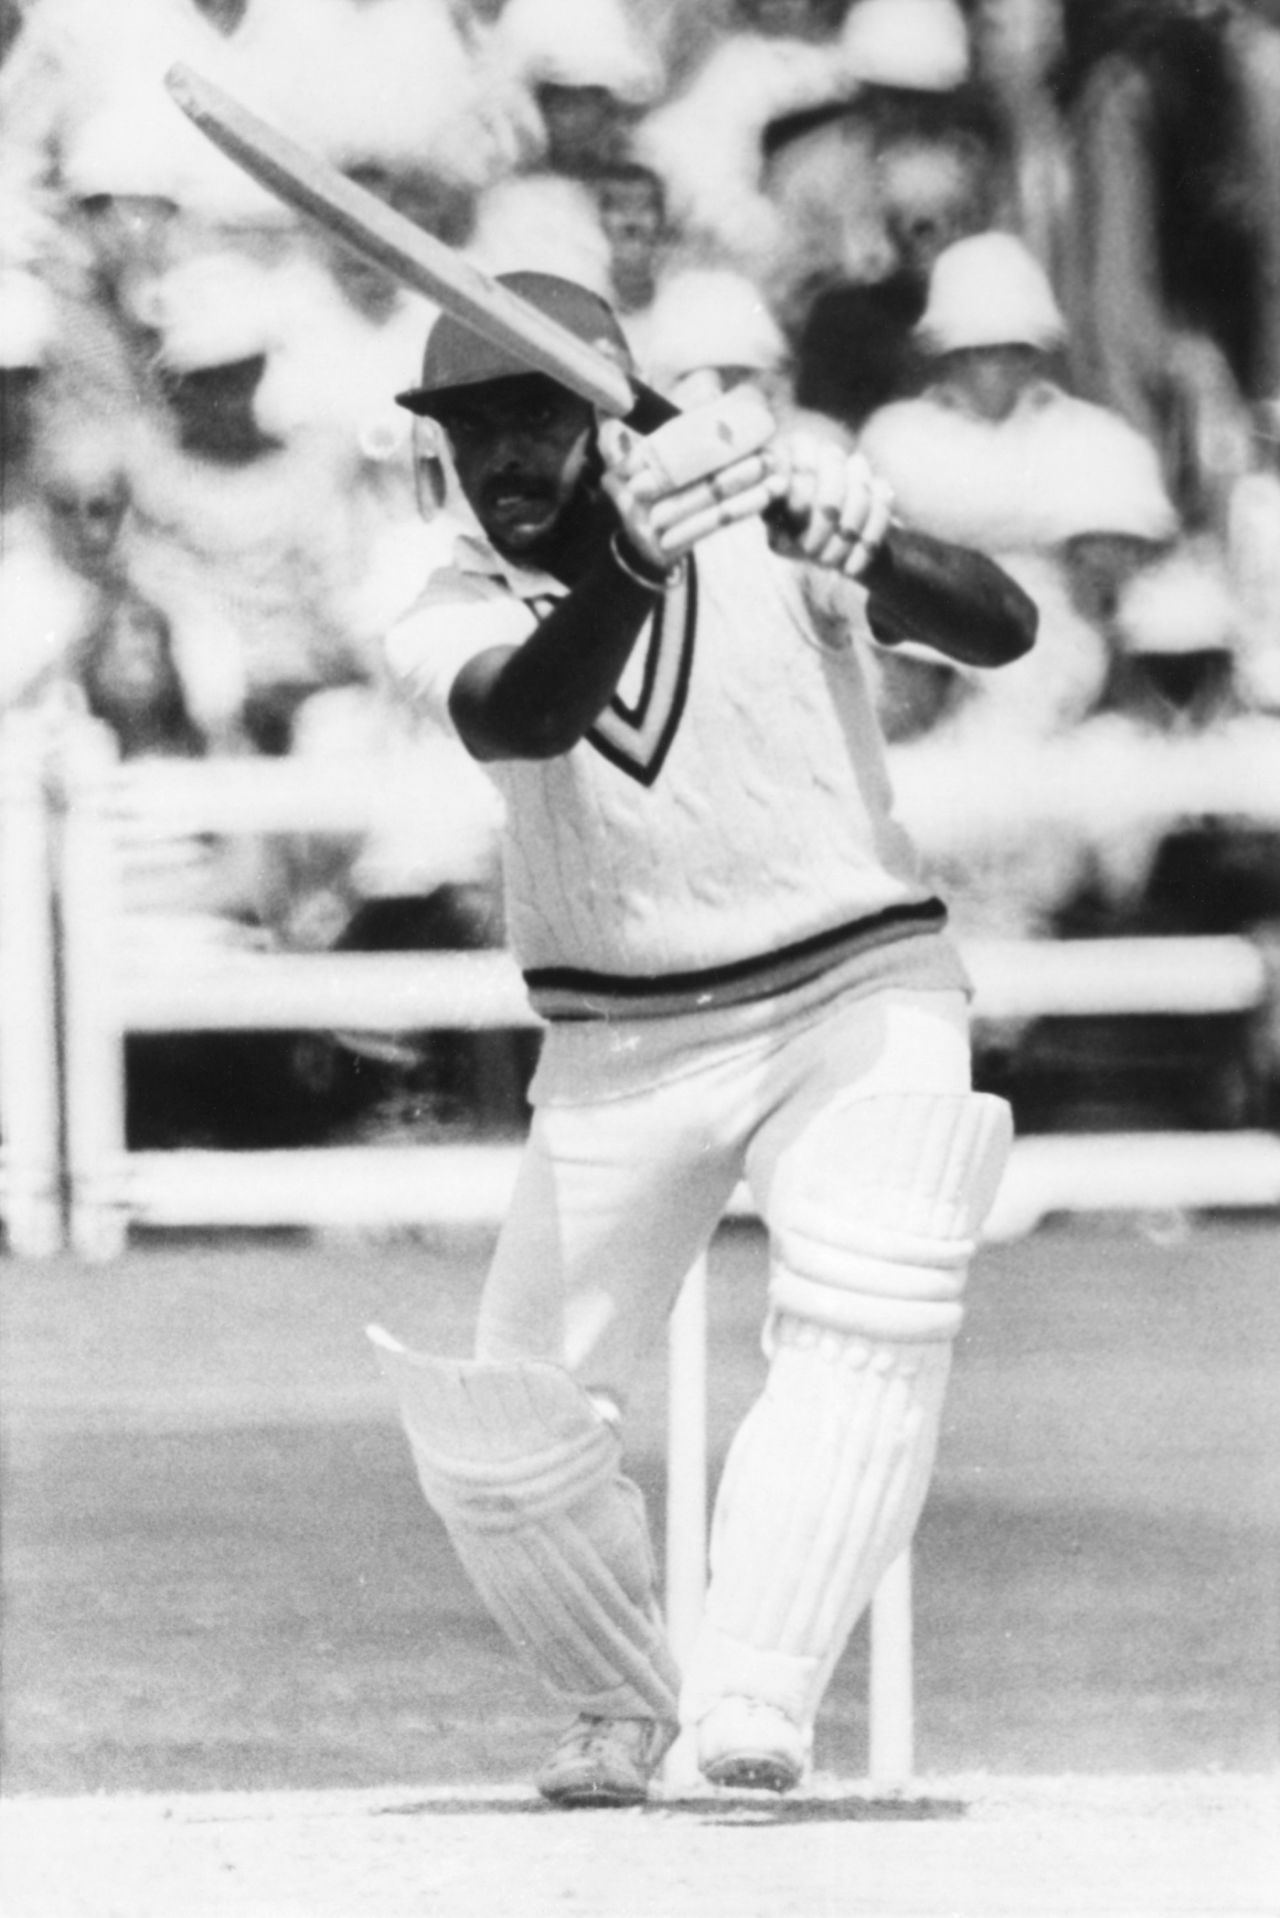 Yashpal Sharma bats against Australia's Ken MacLeay during the 1983 World Cup - he made a run-a-ball 40 in this innings, Australia vs India, World Cup, June 20, 1983, Chelmsford